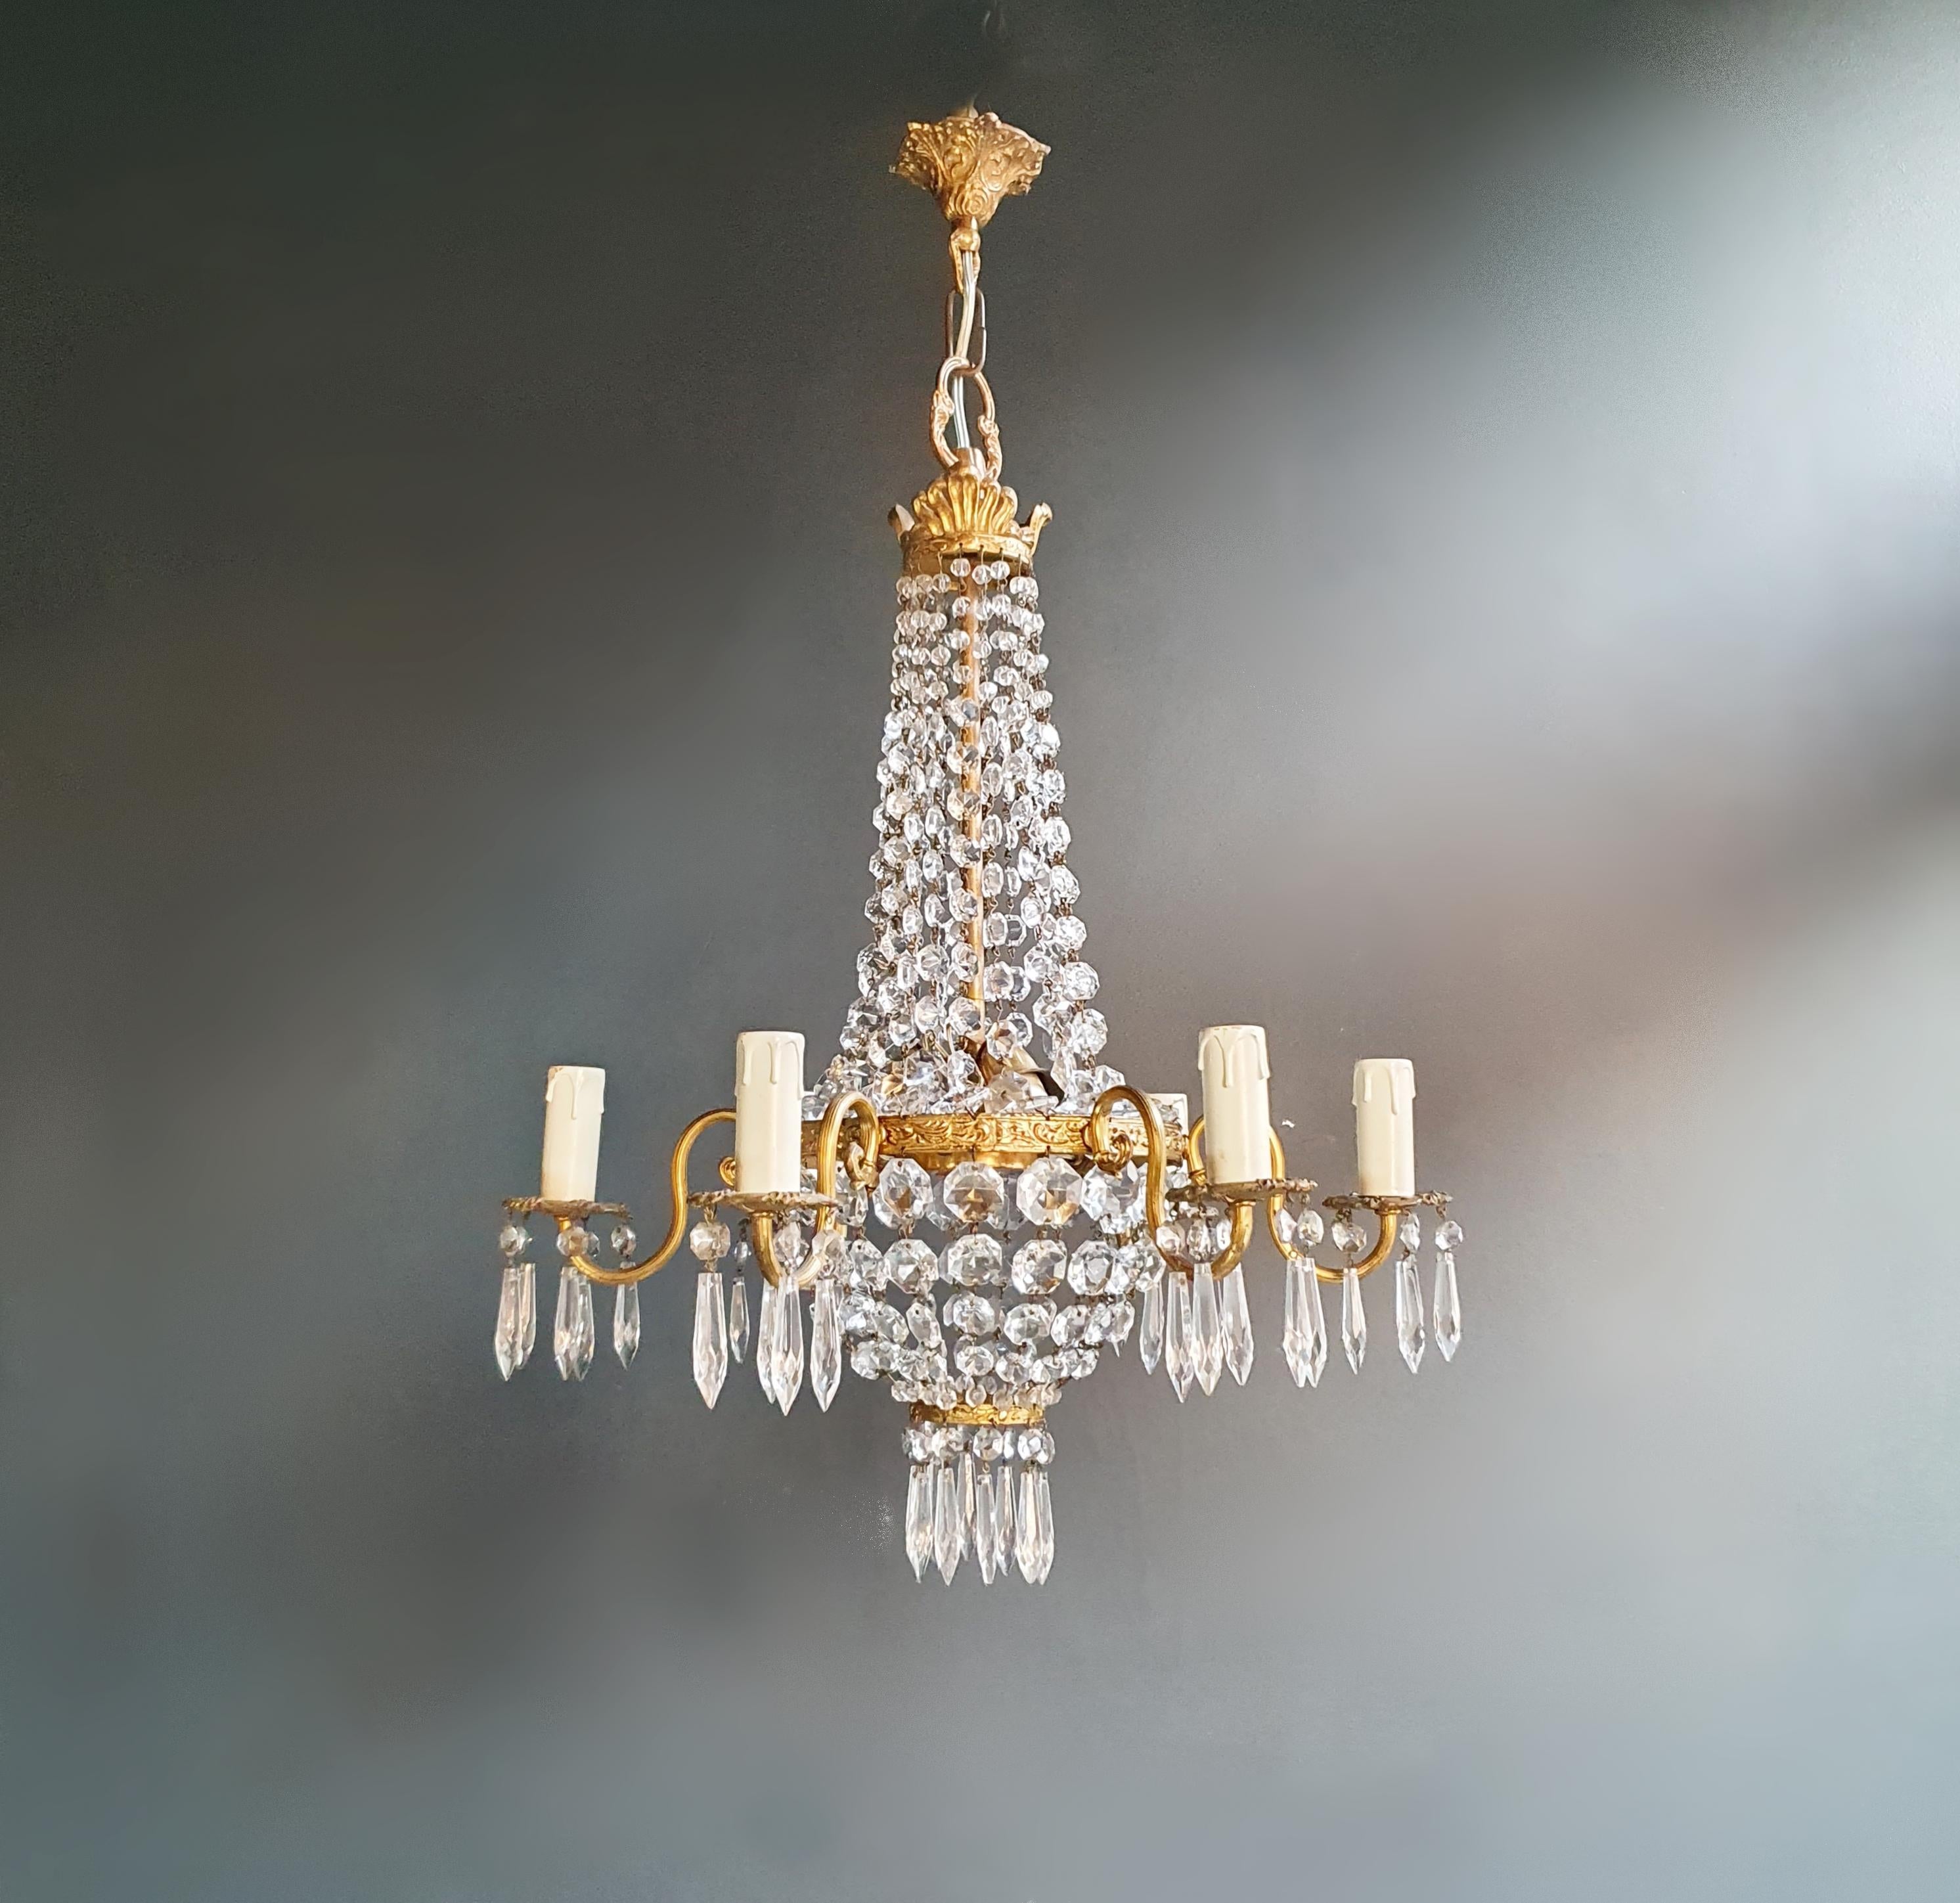 Cabling and sockets completely renewed. Crystal hand knotted
Measures: Total height 80 cm, without chain 60 cm, diameter 47 cm, weight (approximately) 4 kg.

Number of lights: 9-light bulb sockets: E14

Fine brass Empire Sac a pearl chandelier